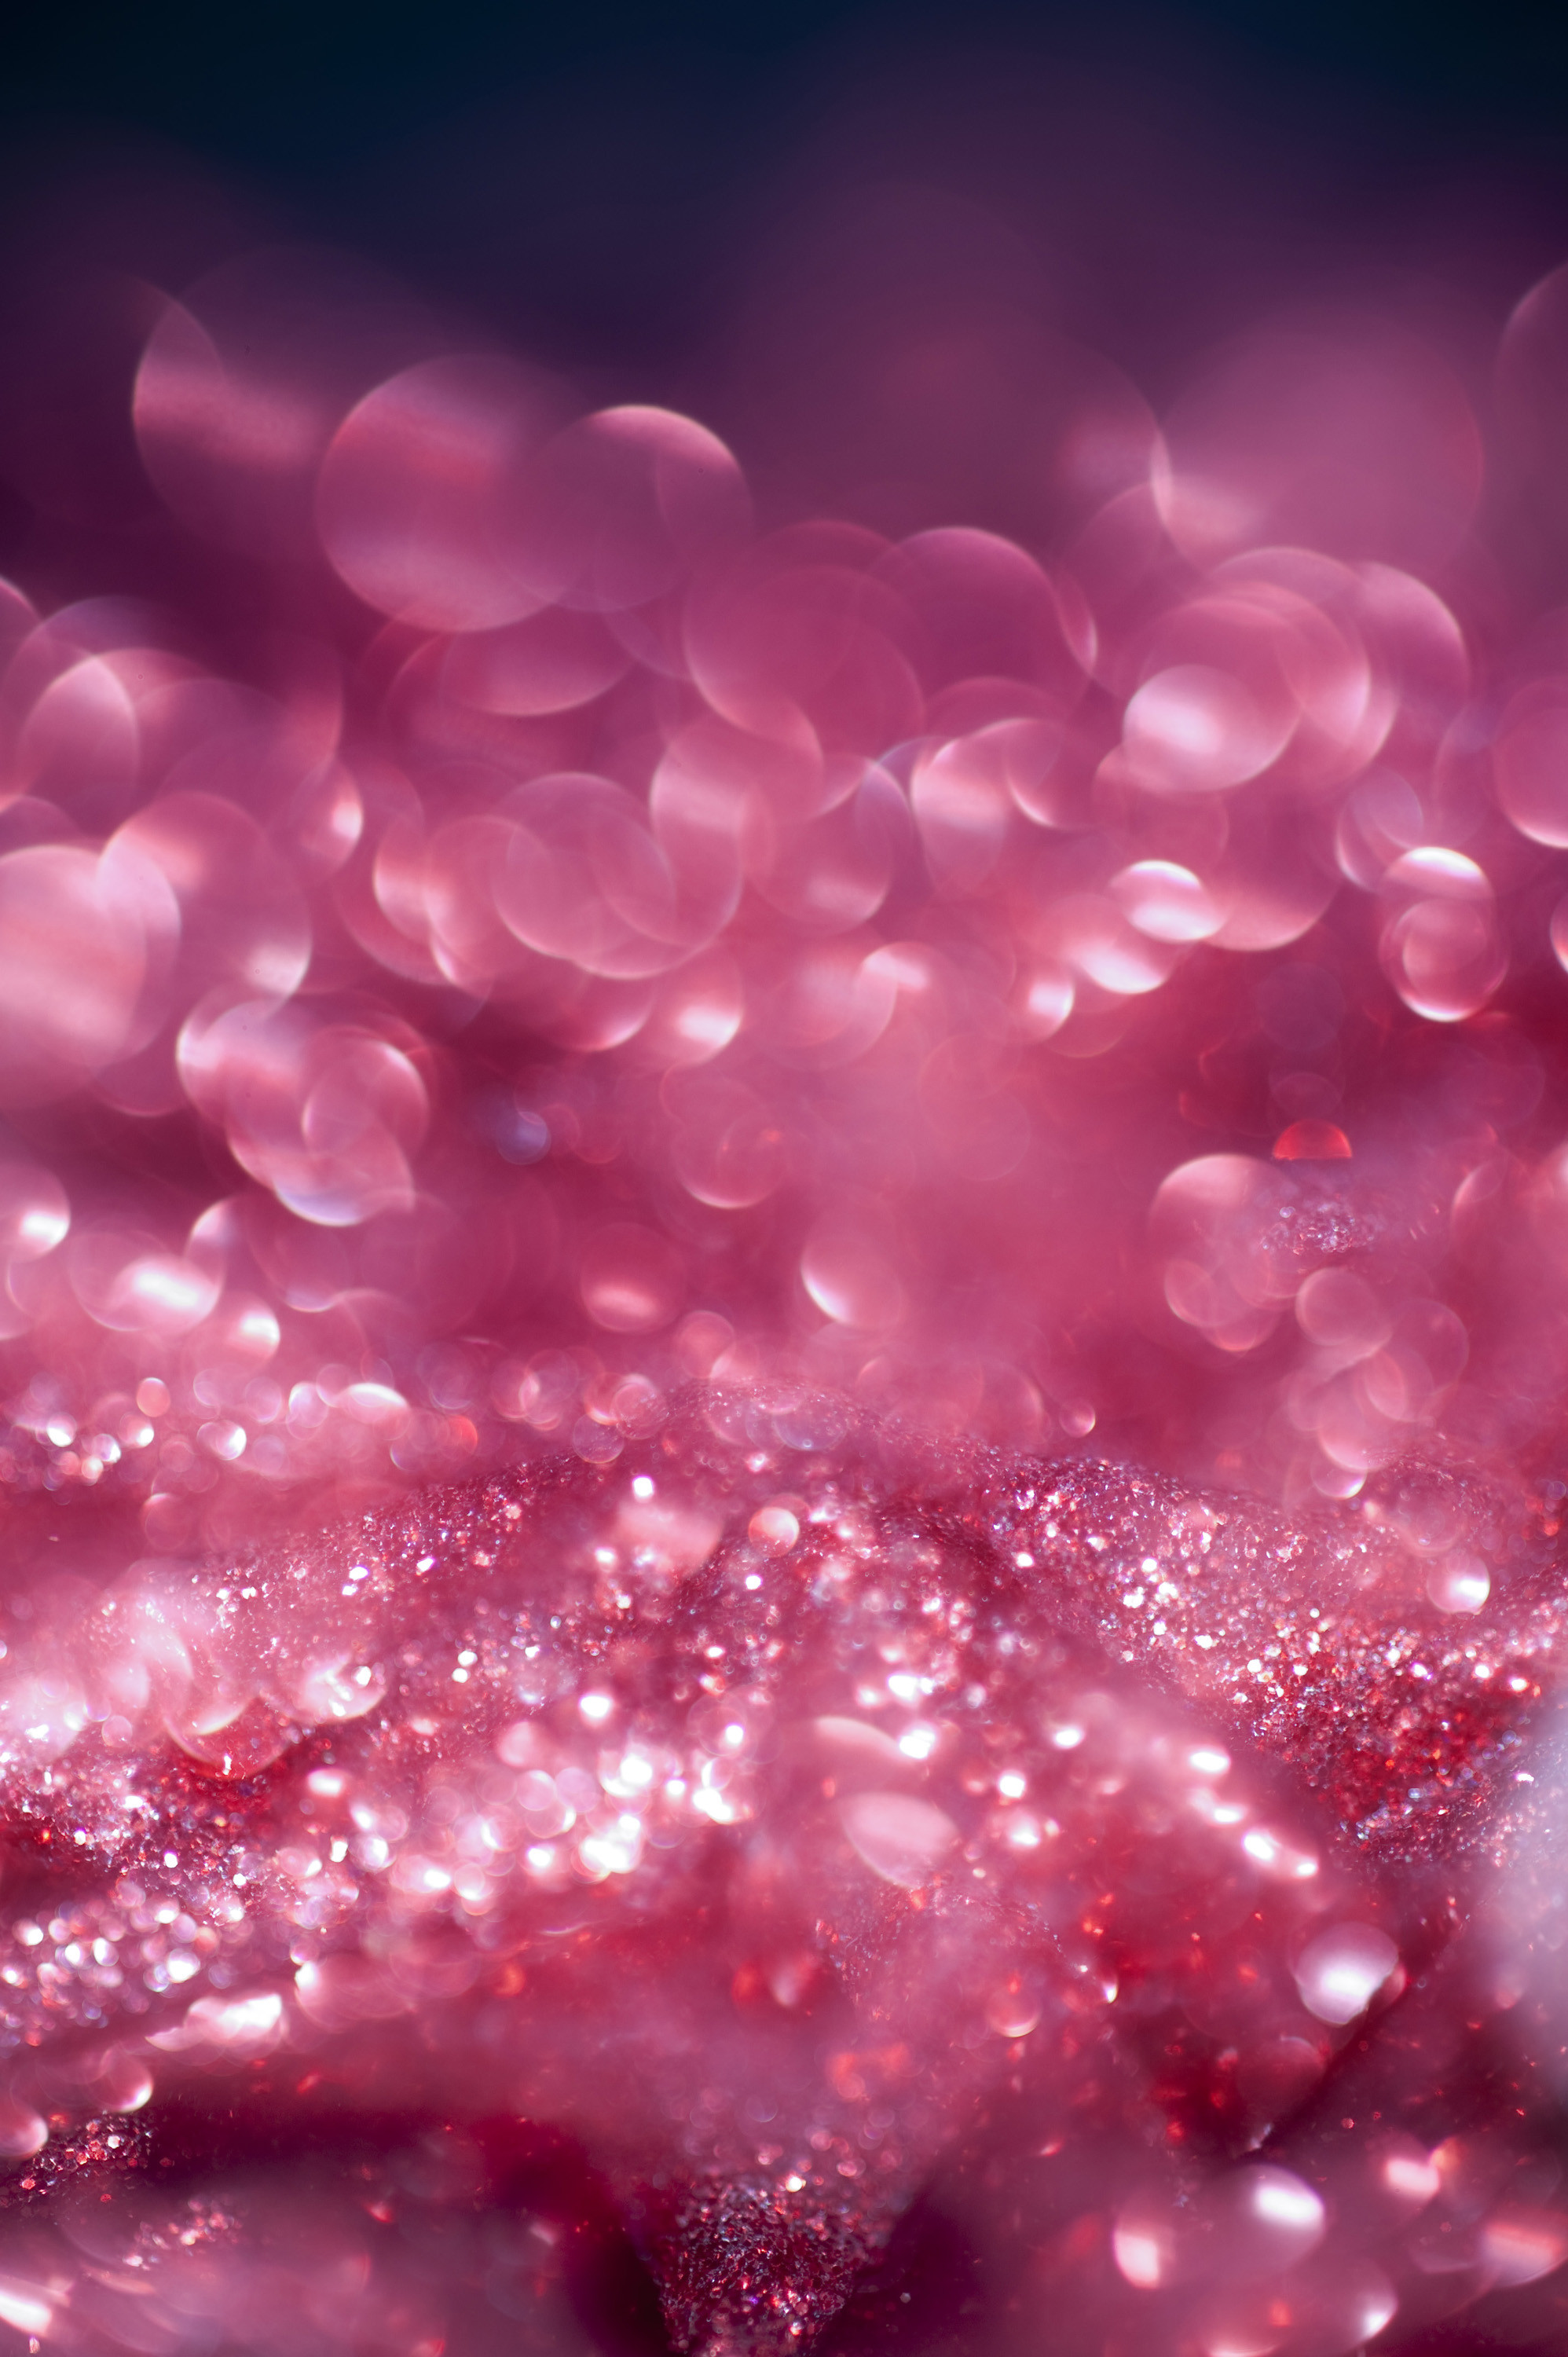 Explore Iphone 5c Wallpaper, Pink Wallpaper, and more! Pink glitter